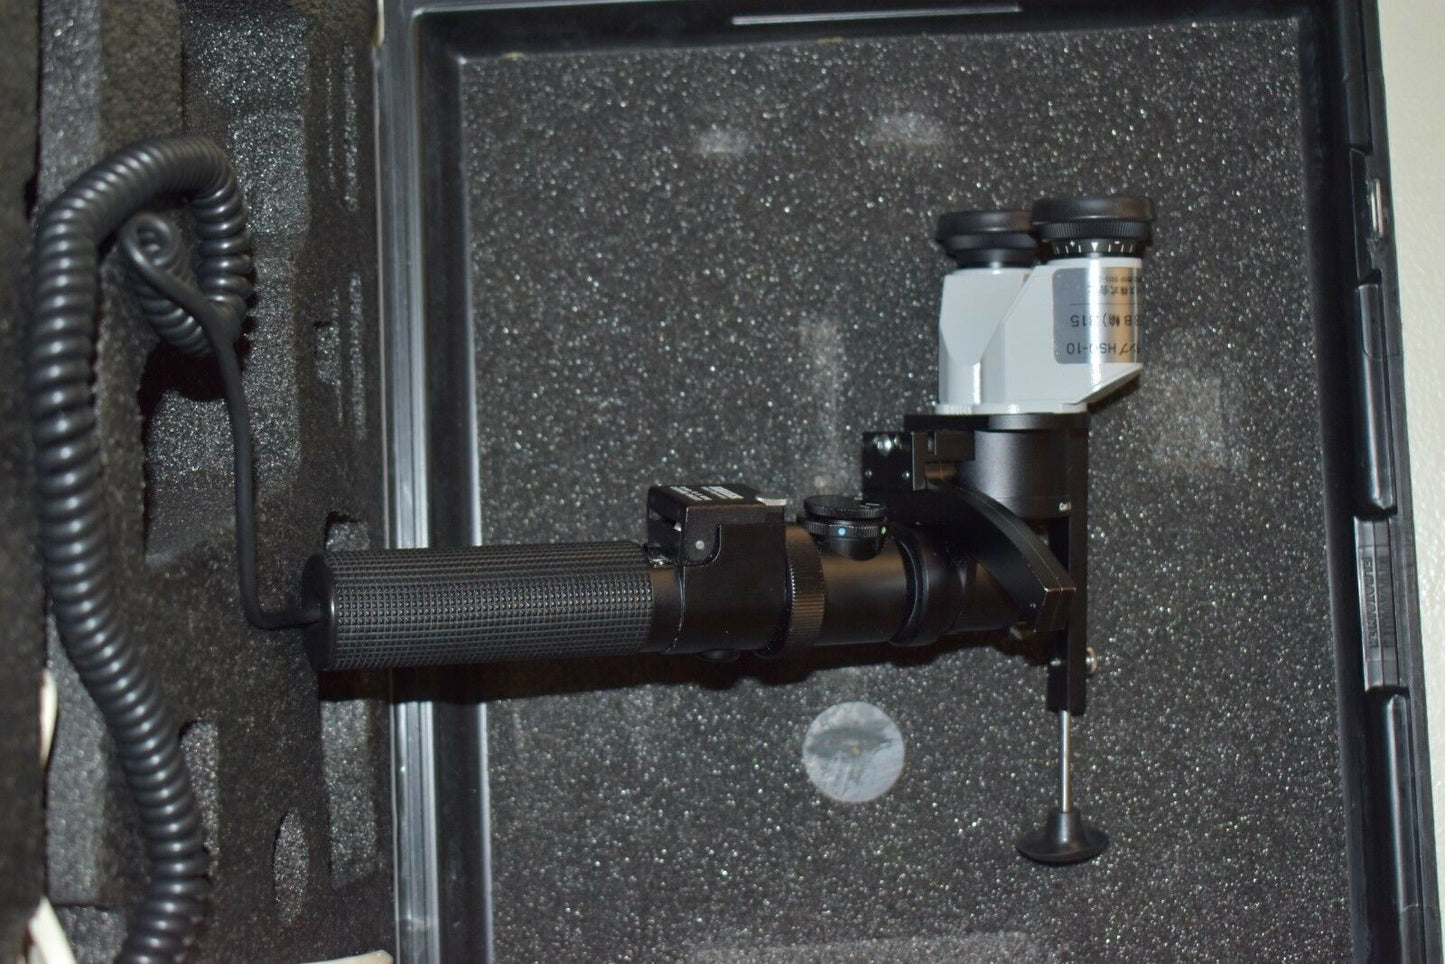 Zeiss HSO-10 portable slit-lamp with carrying case